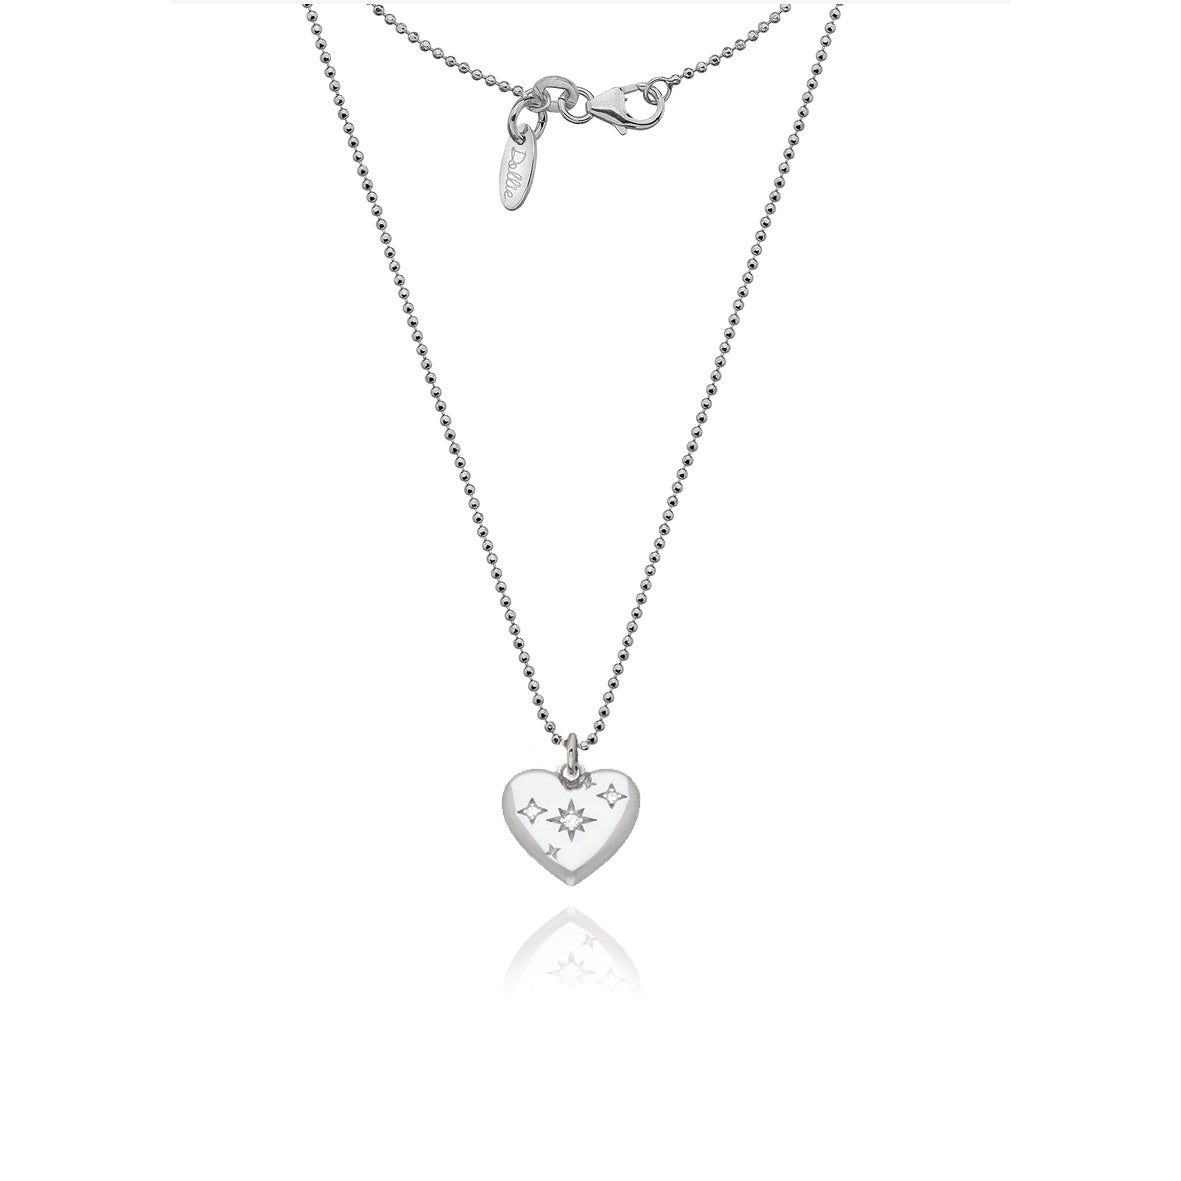 Ophelia Silver Heart Necklace